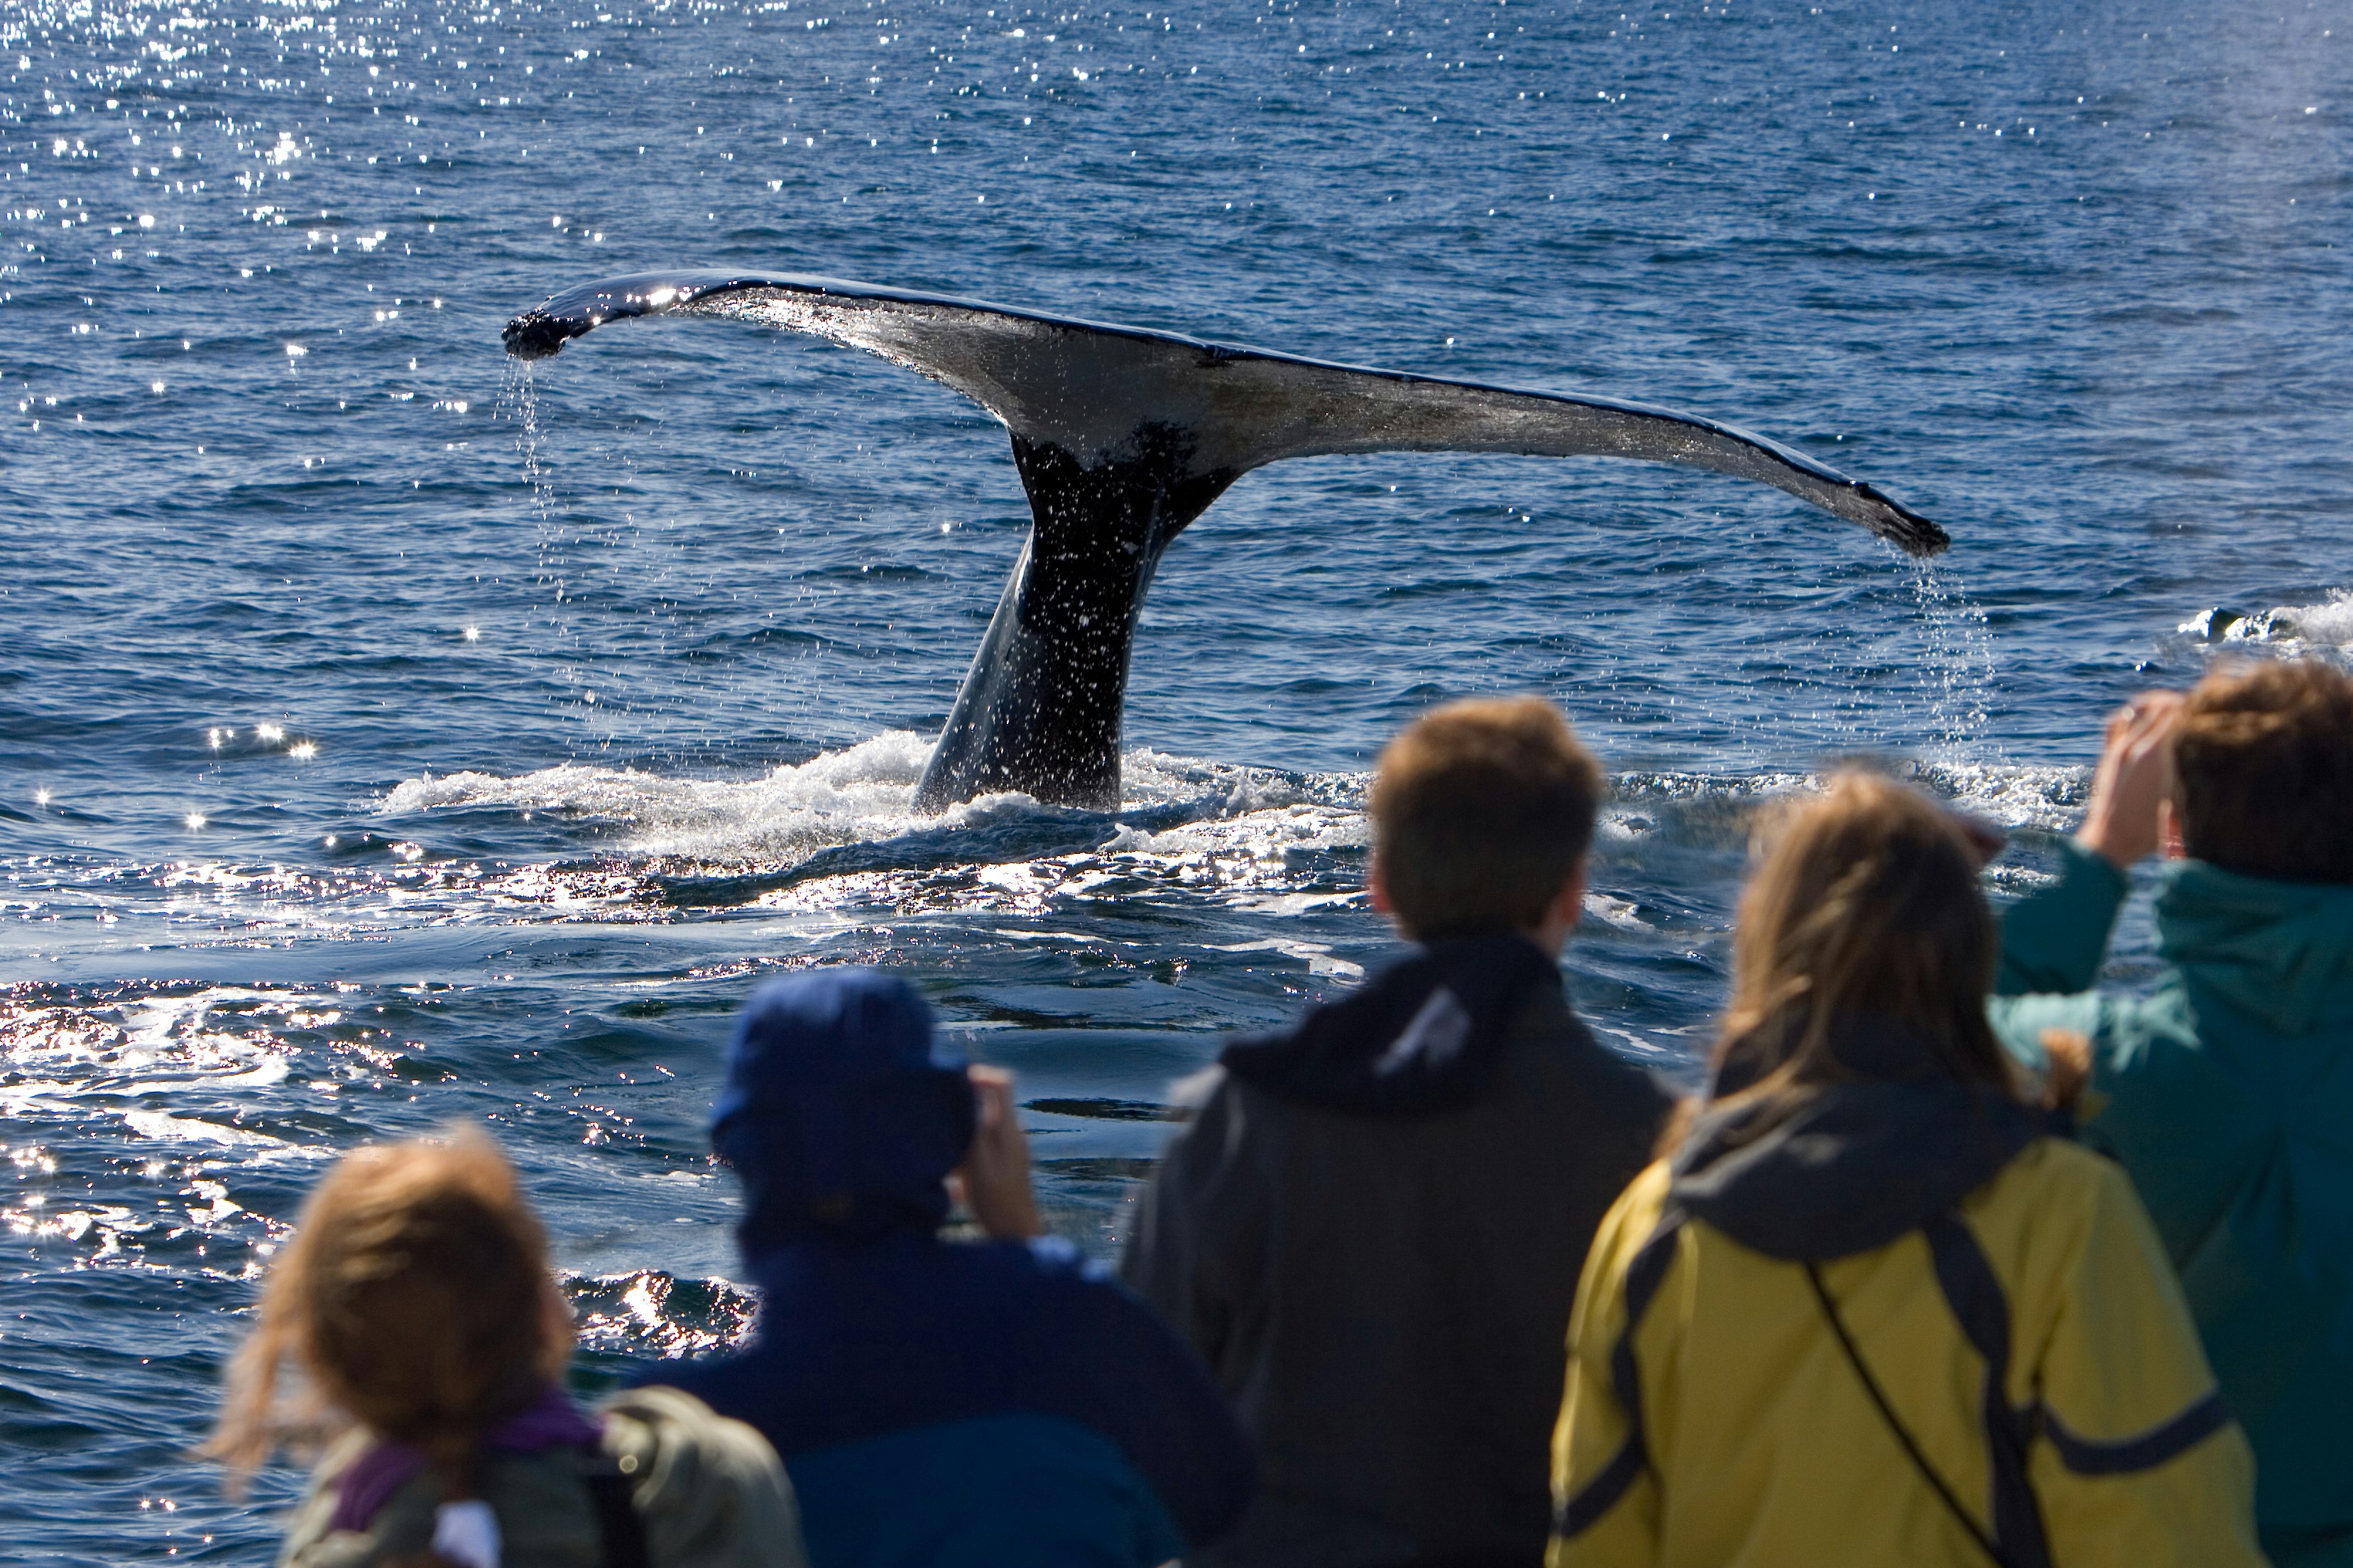 A group of people in a boat watch the large tail of a whale descend into the sea.